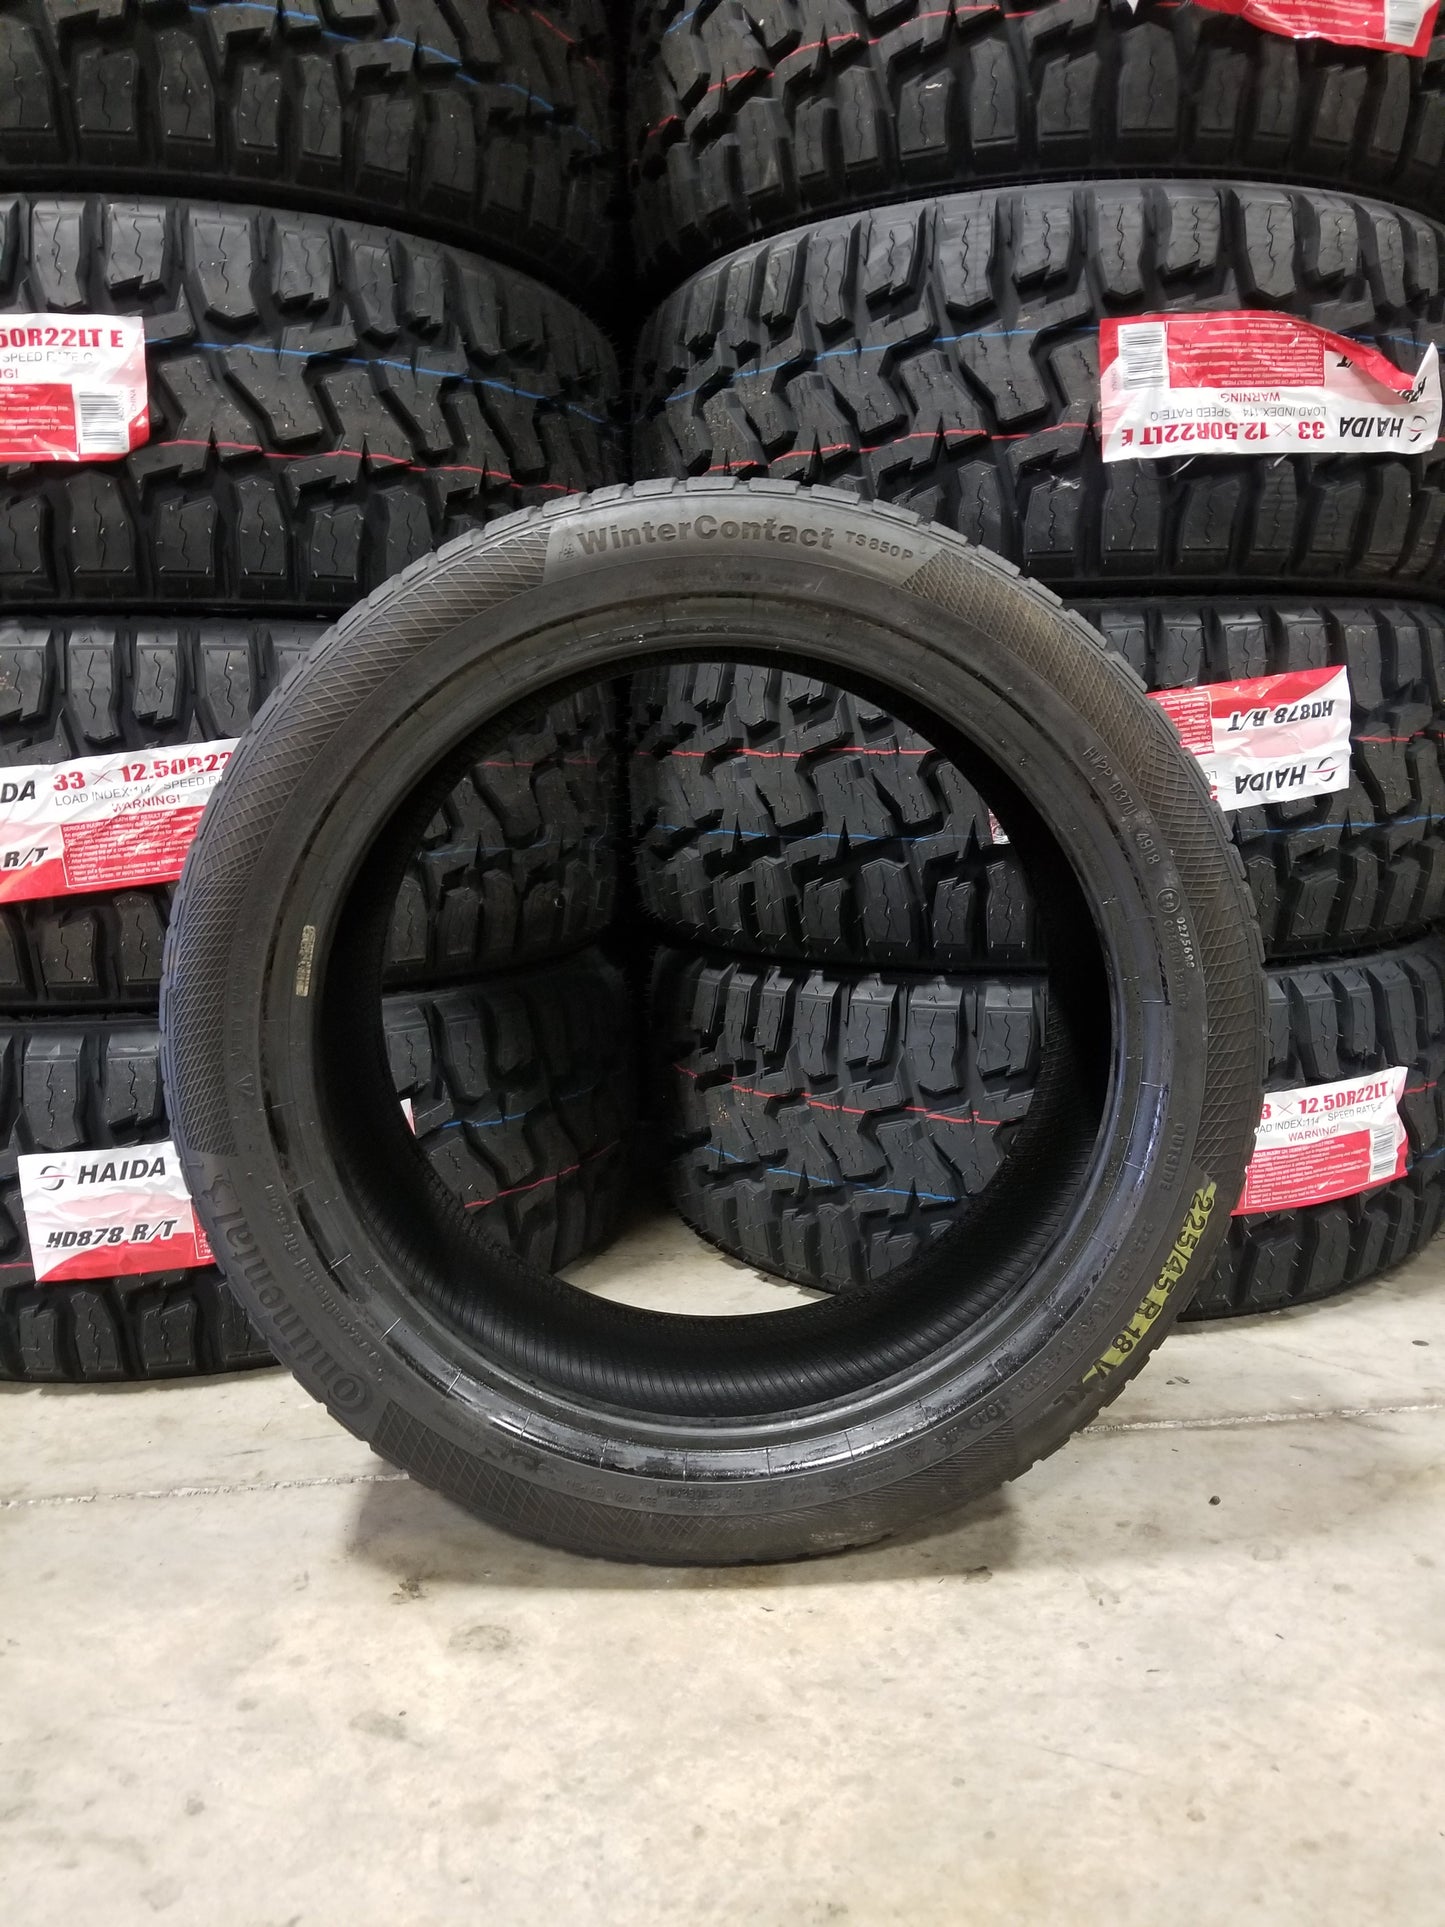 SET OF 2 225/45R18 Continental Winter contact TS850P 95 V XL - Used Tires